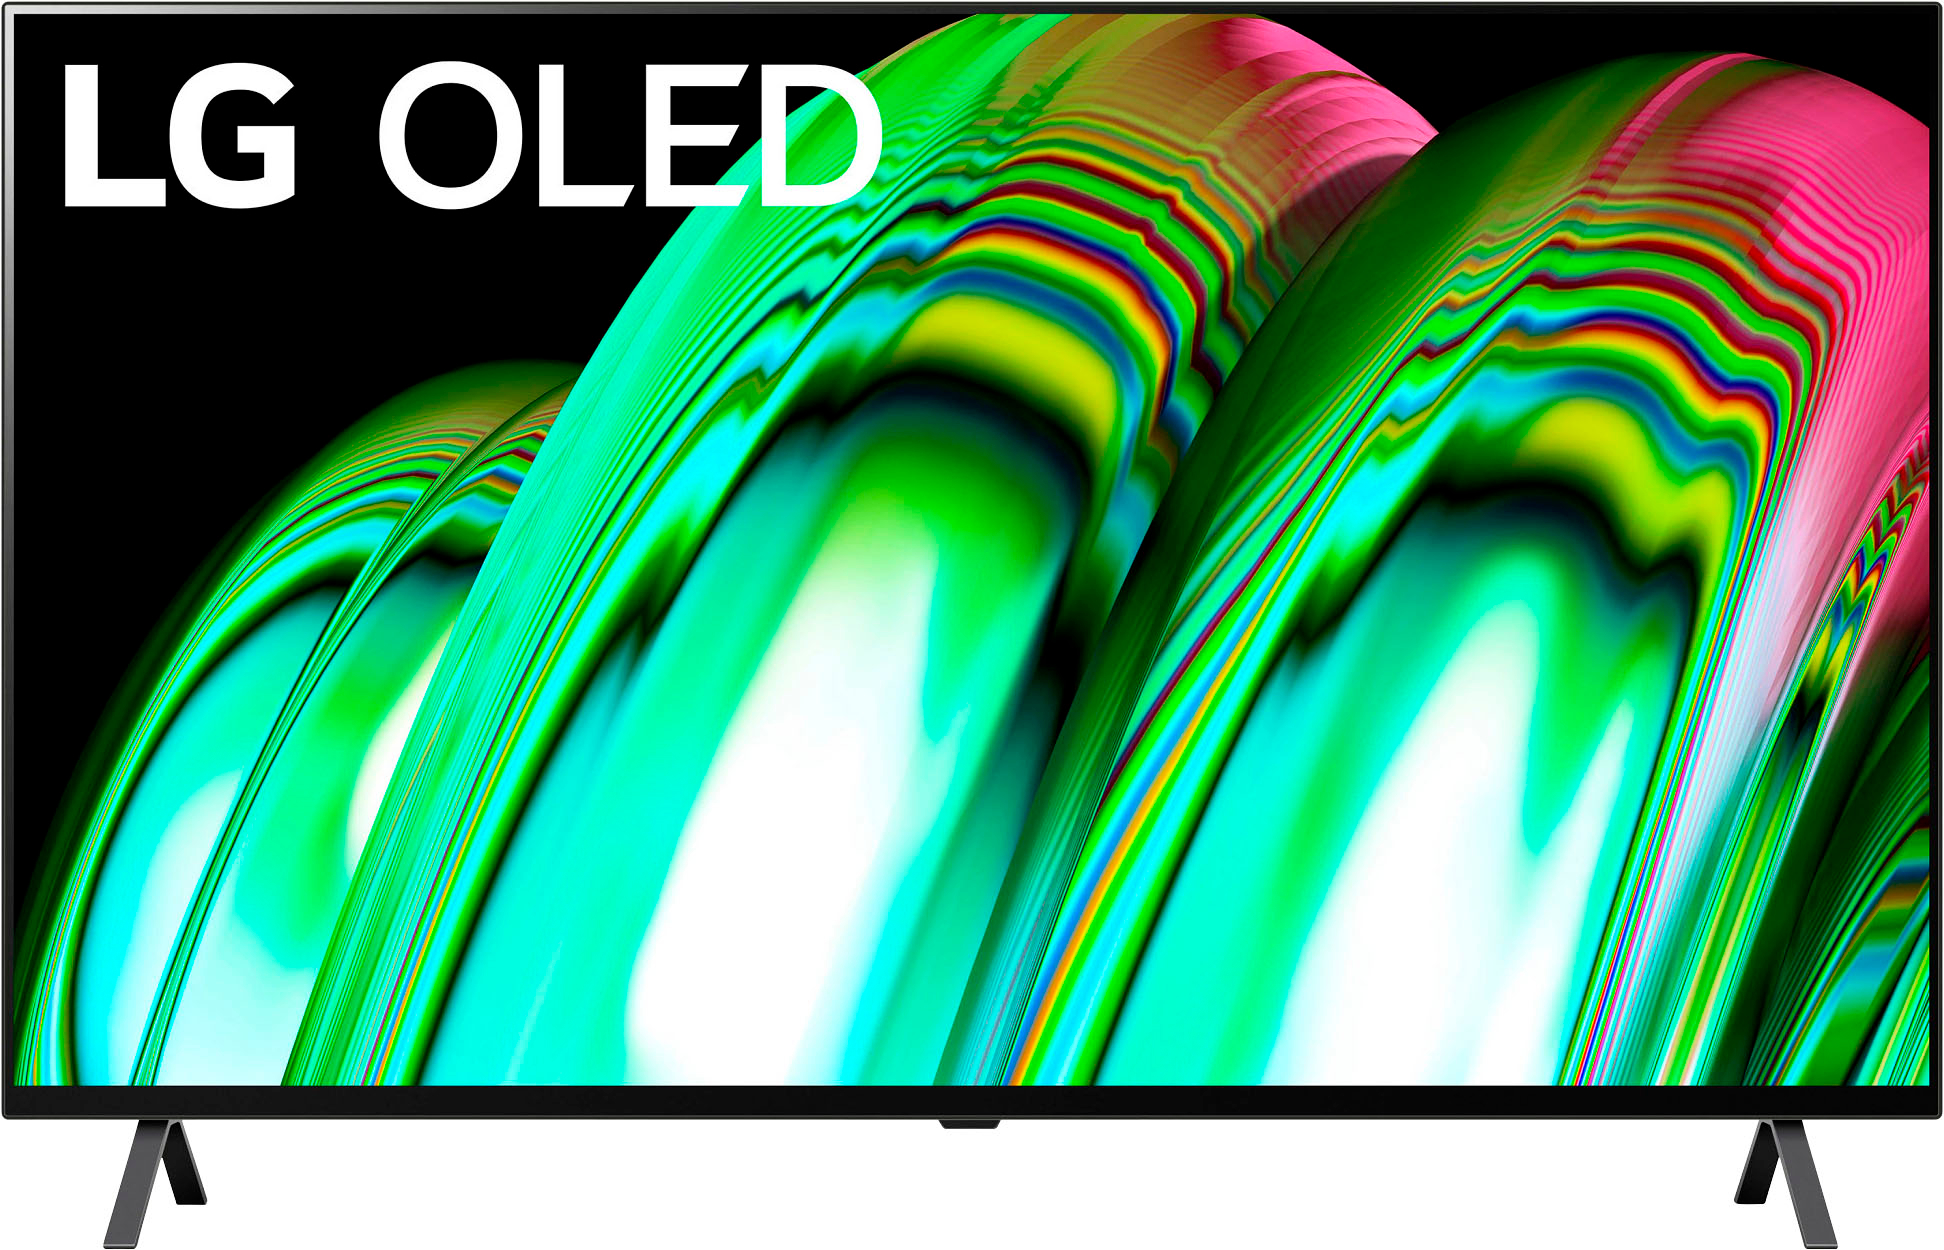 LG A2 OLED TV with Dolby Vision HDR drops below US$550 at Best Buy